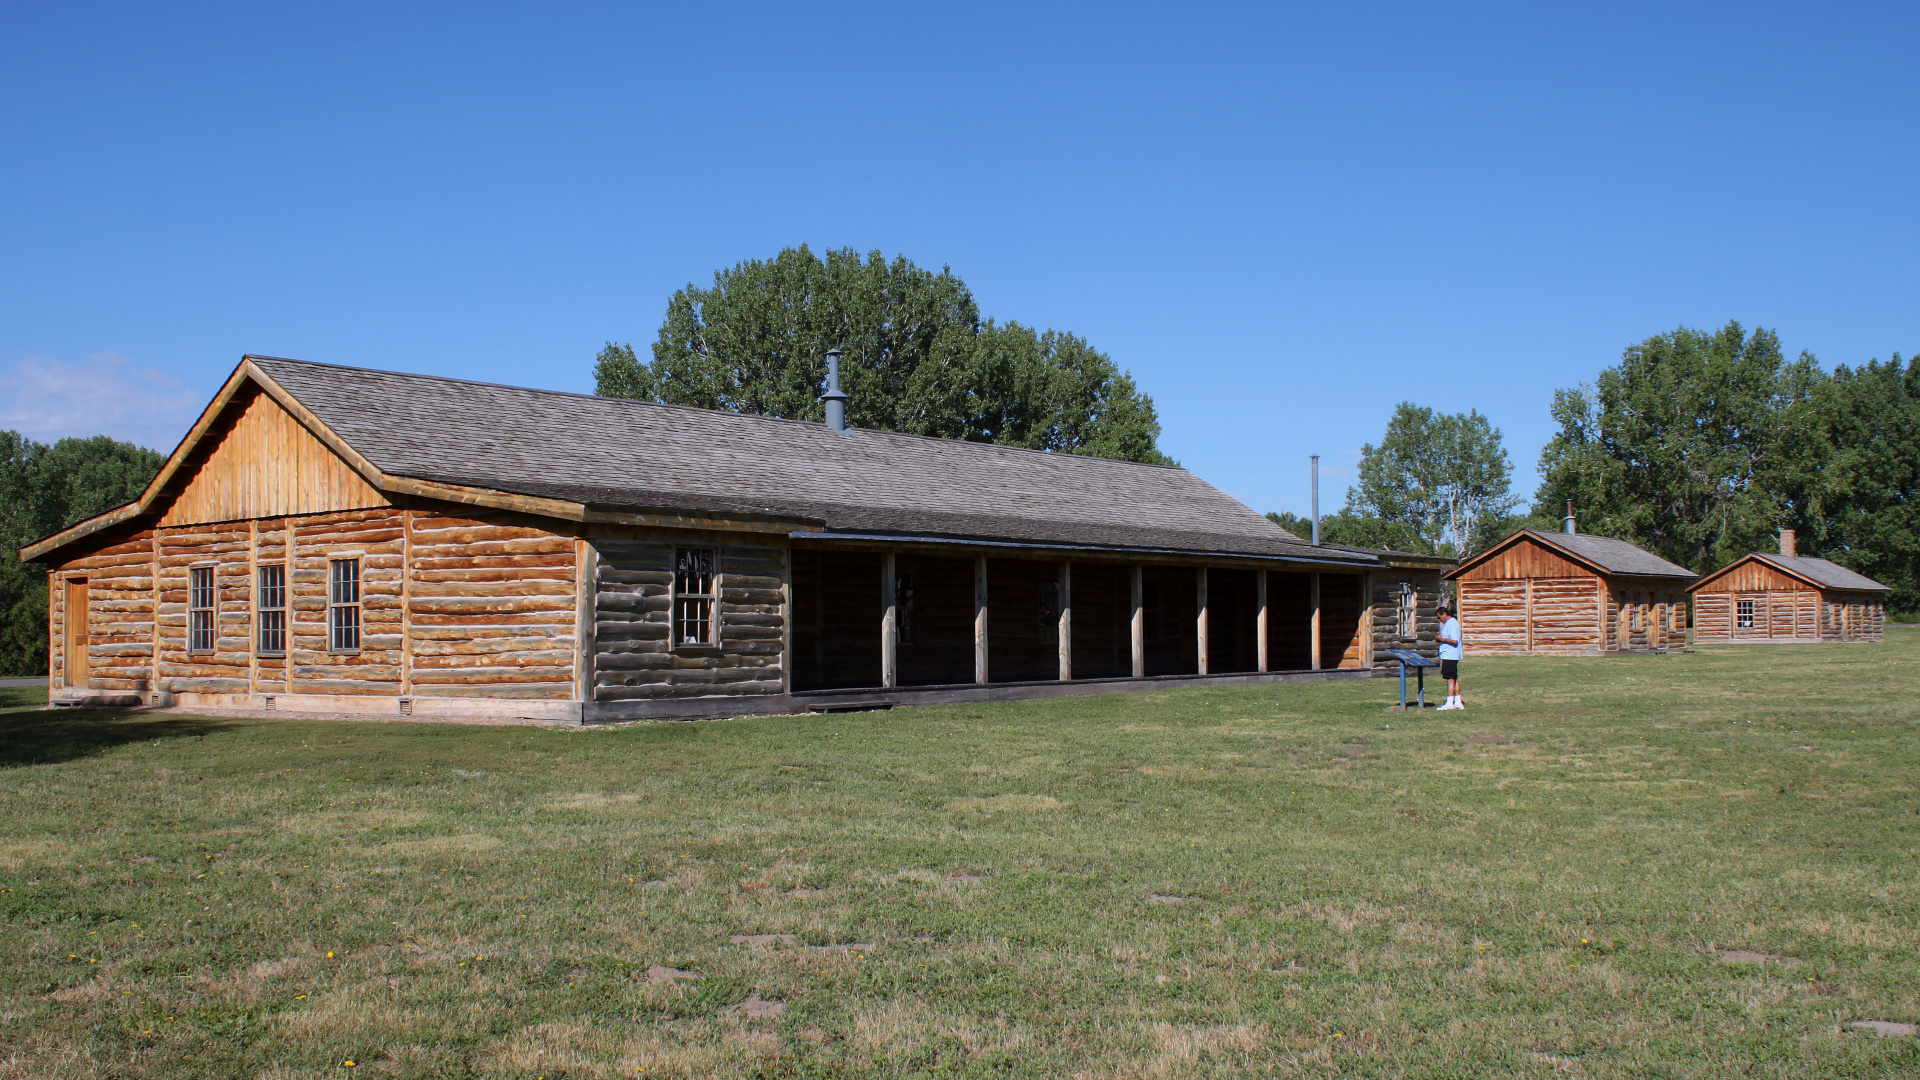 Restored Buildings (Travels » US Trip 3: The Roads Not Taken » The Country » Fort Robinson)